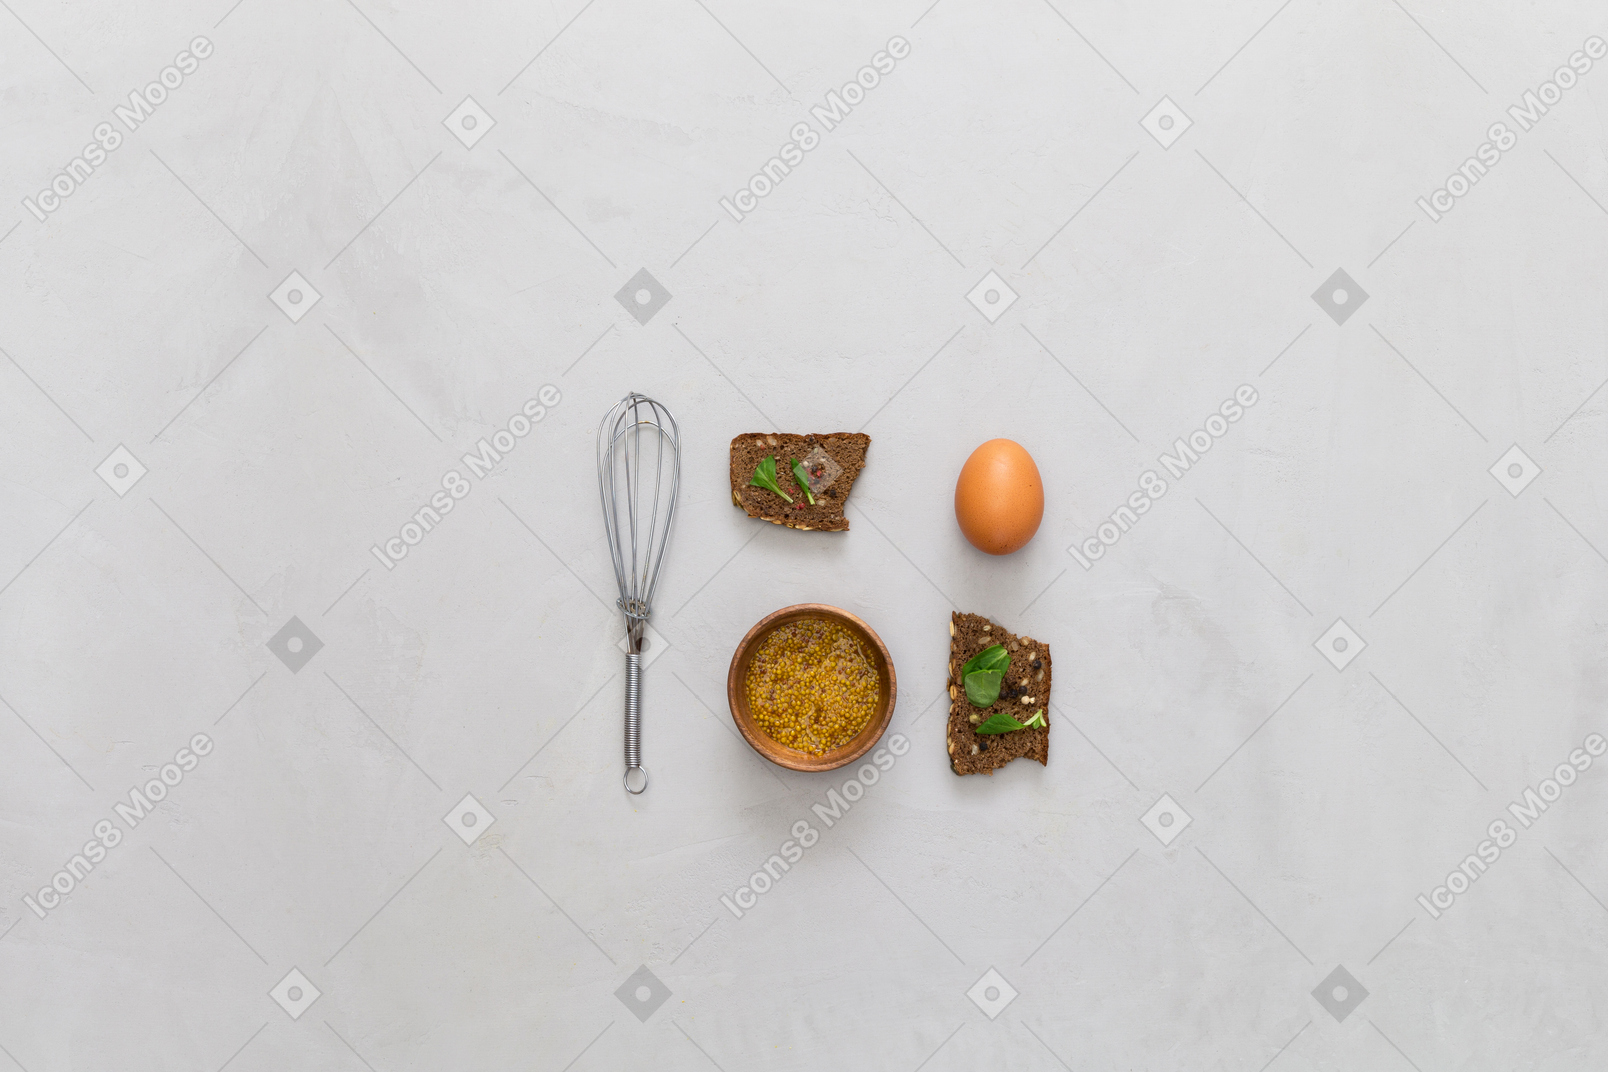 Egg and snack are perfect for breakfast